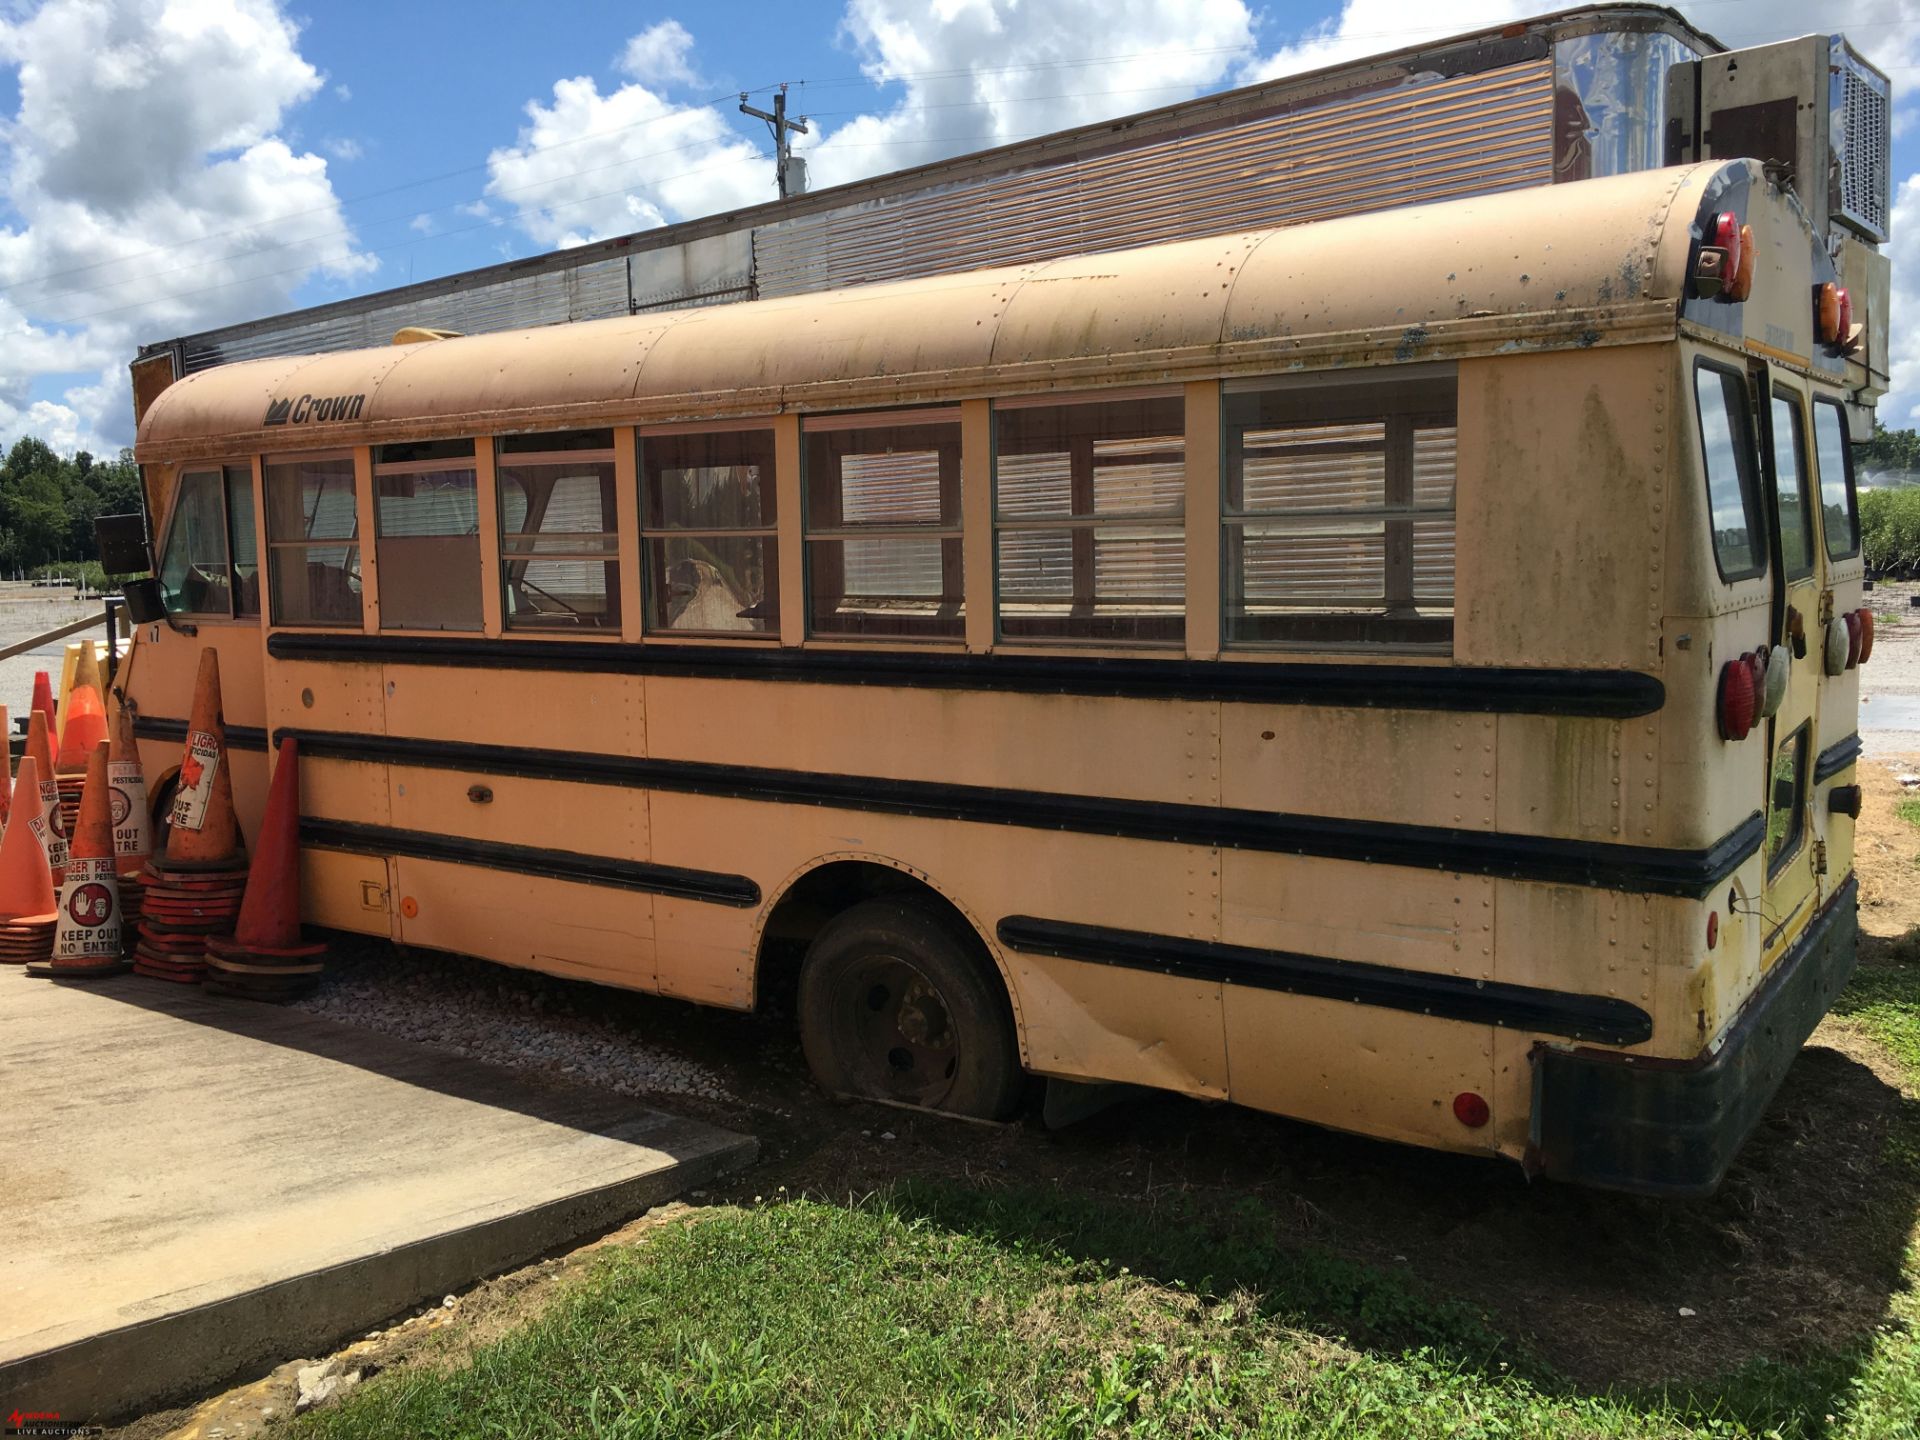 1993 CROWN MINI SCHOOL BUS, 350, AUTOMATIC, BEEN SITTING FOR A LONG TIME, DINGS/SCRATCHES/DENTS/ - Image 2 of 11